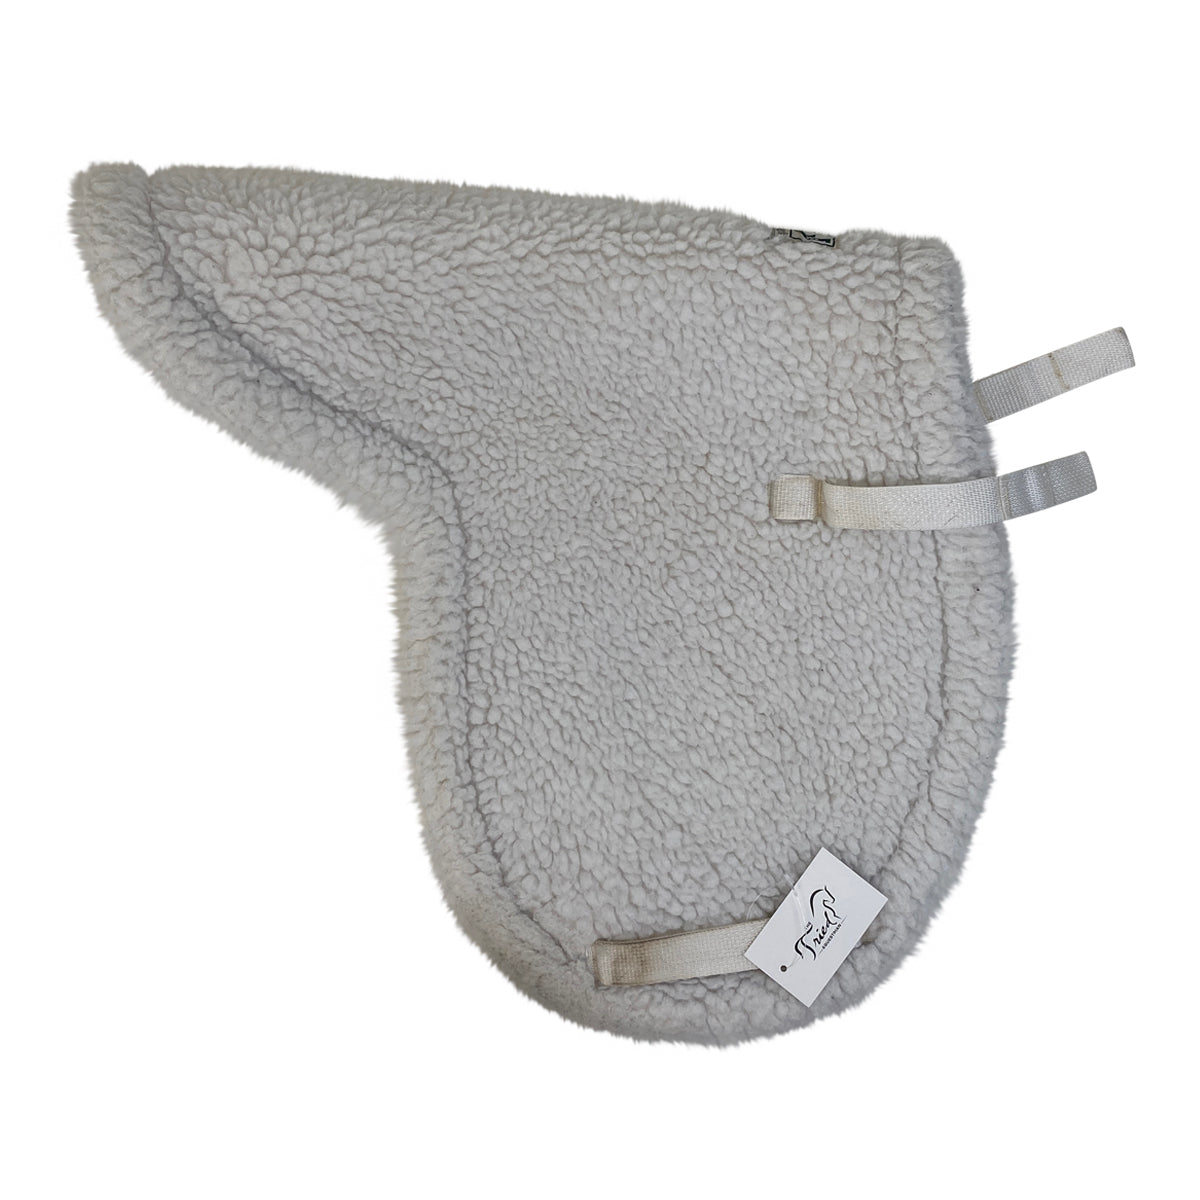 Wilkers Quilted Fleece Shaped Saddle Pad in White